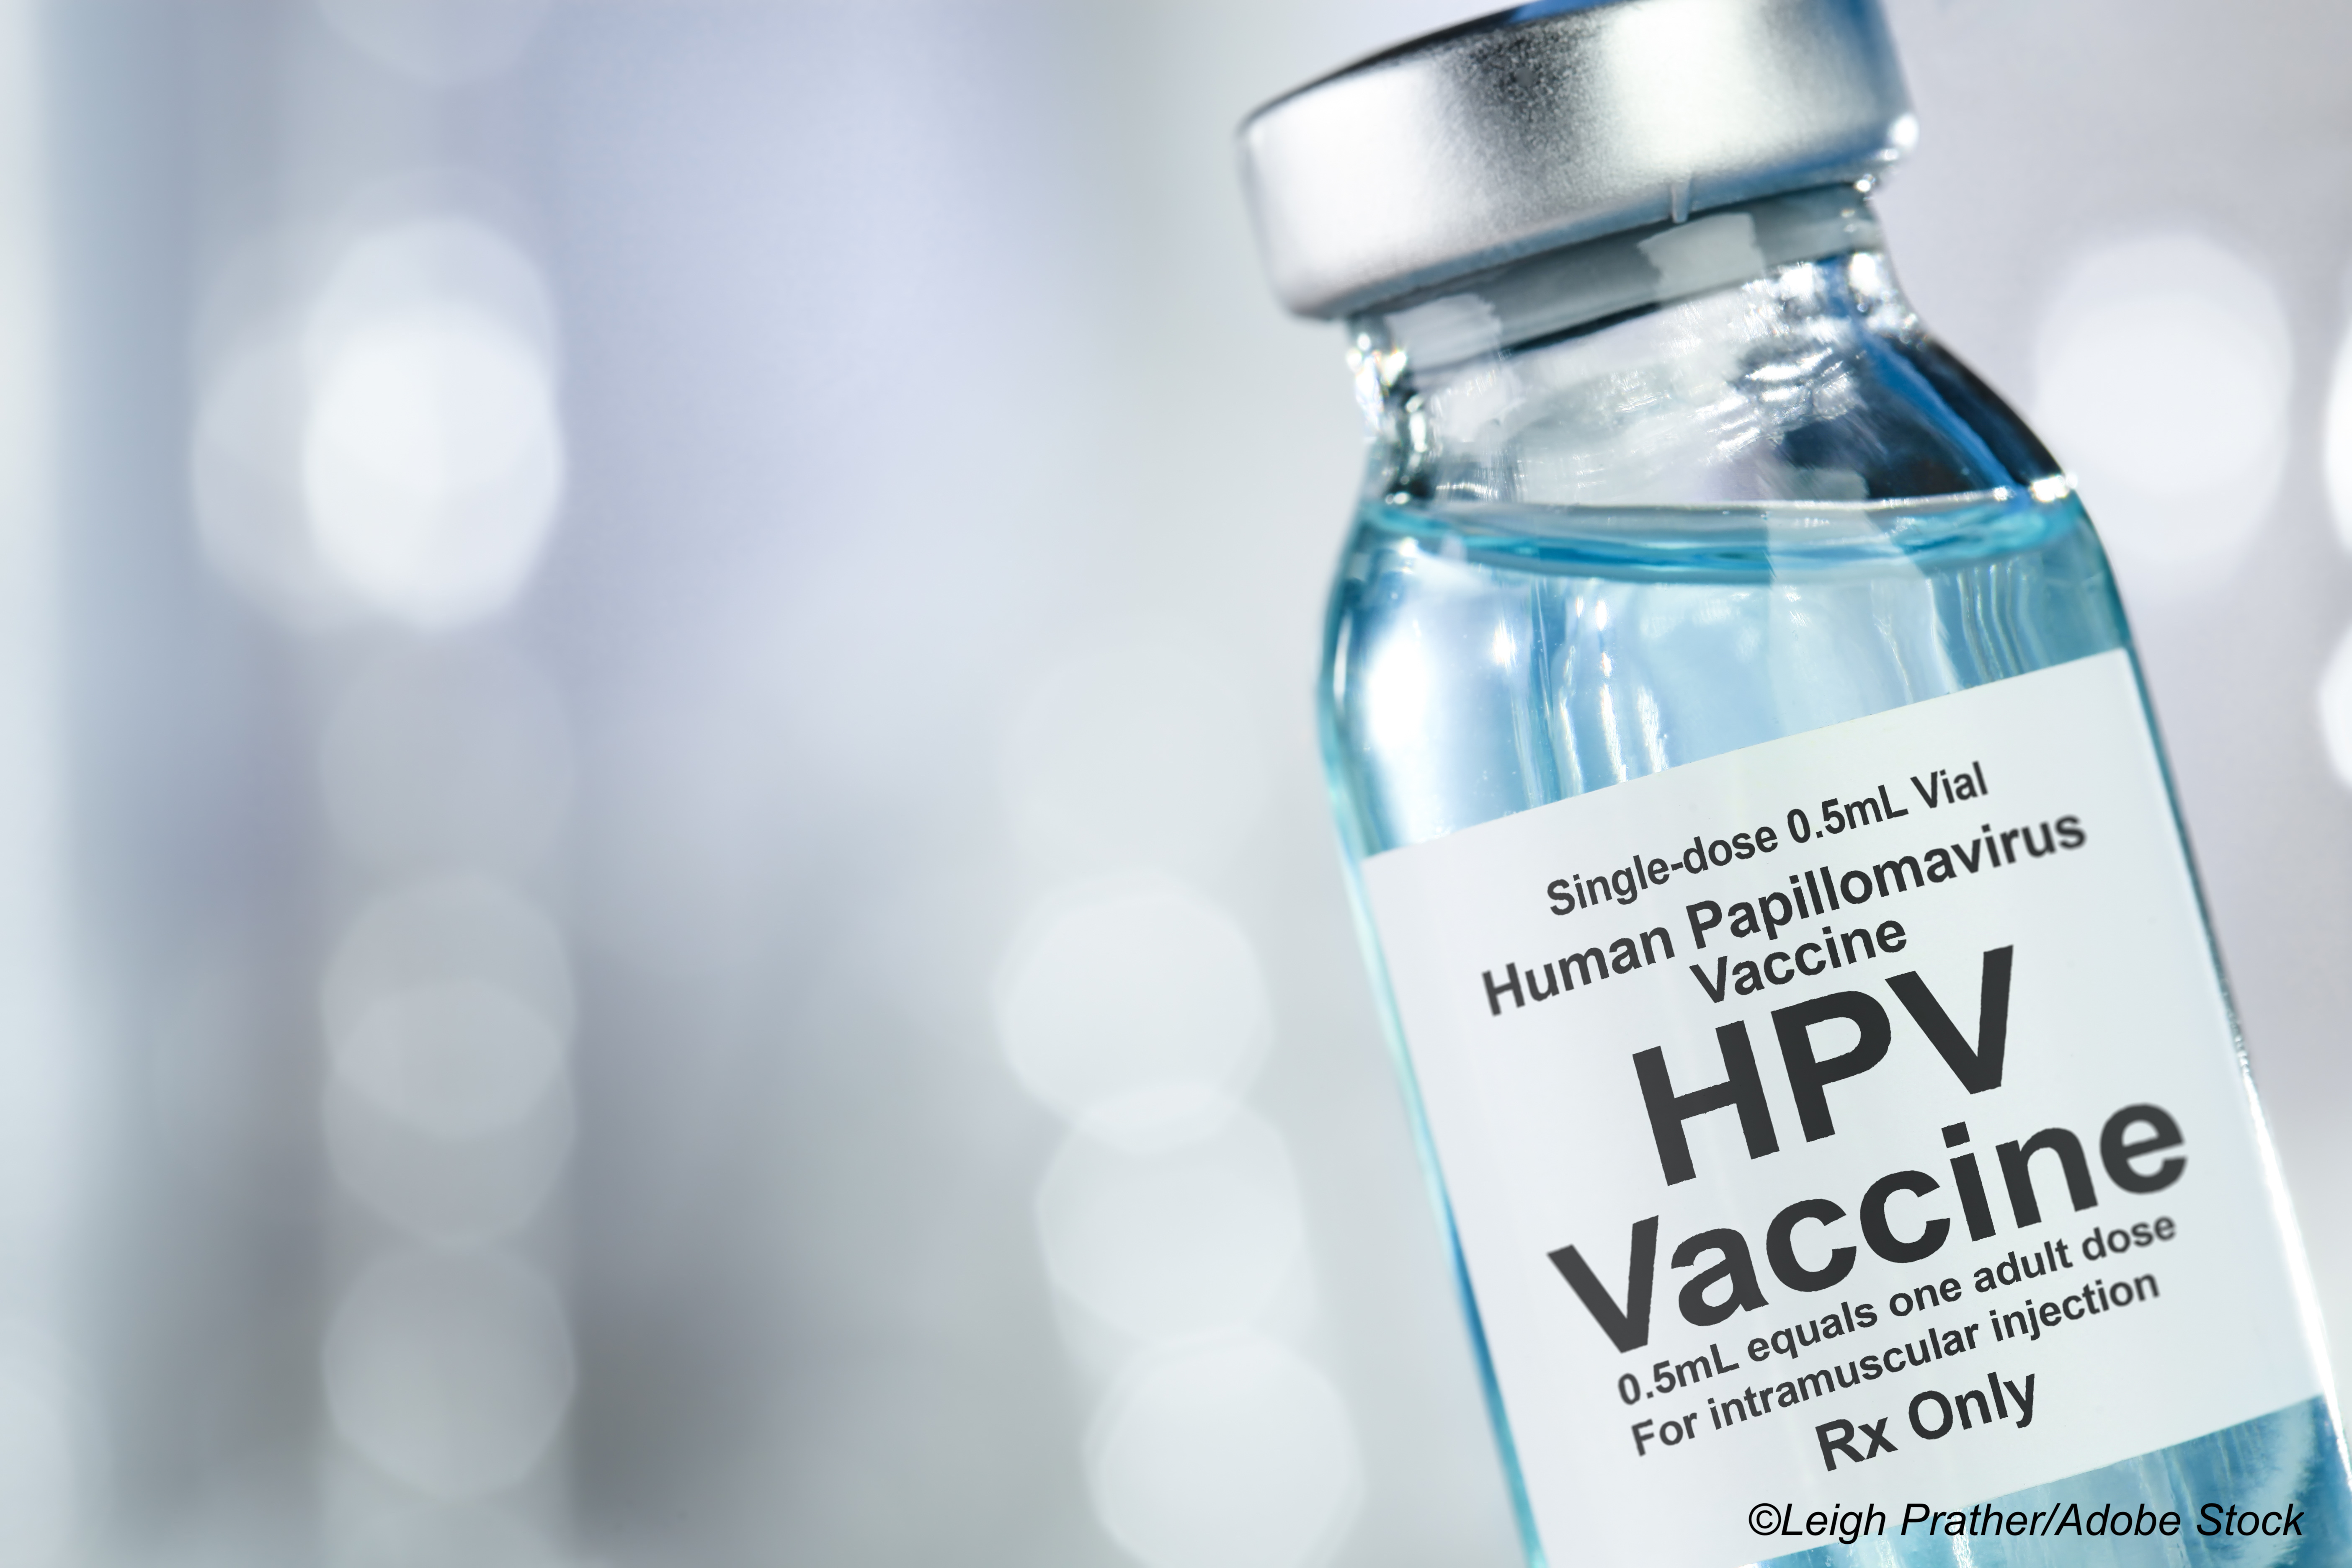 Mom’s Cervical Cancer Exposure Won’t Boost HPV Shots for Their Kids
